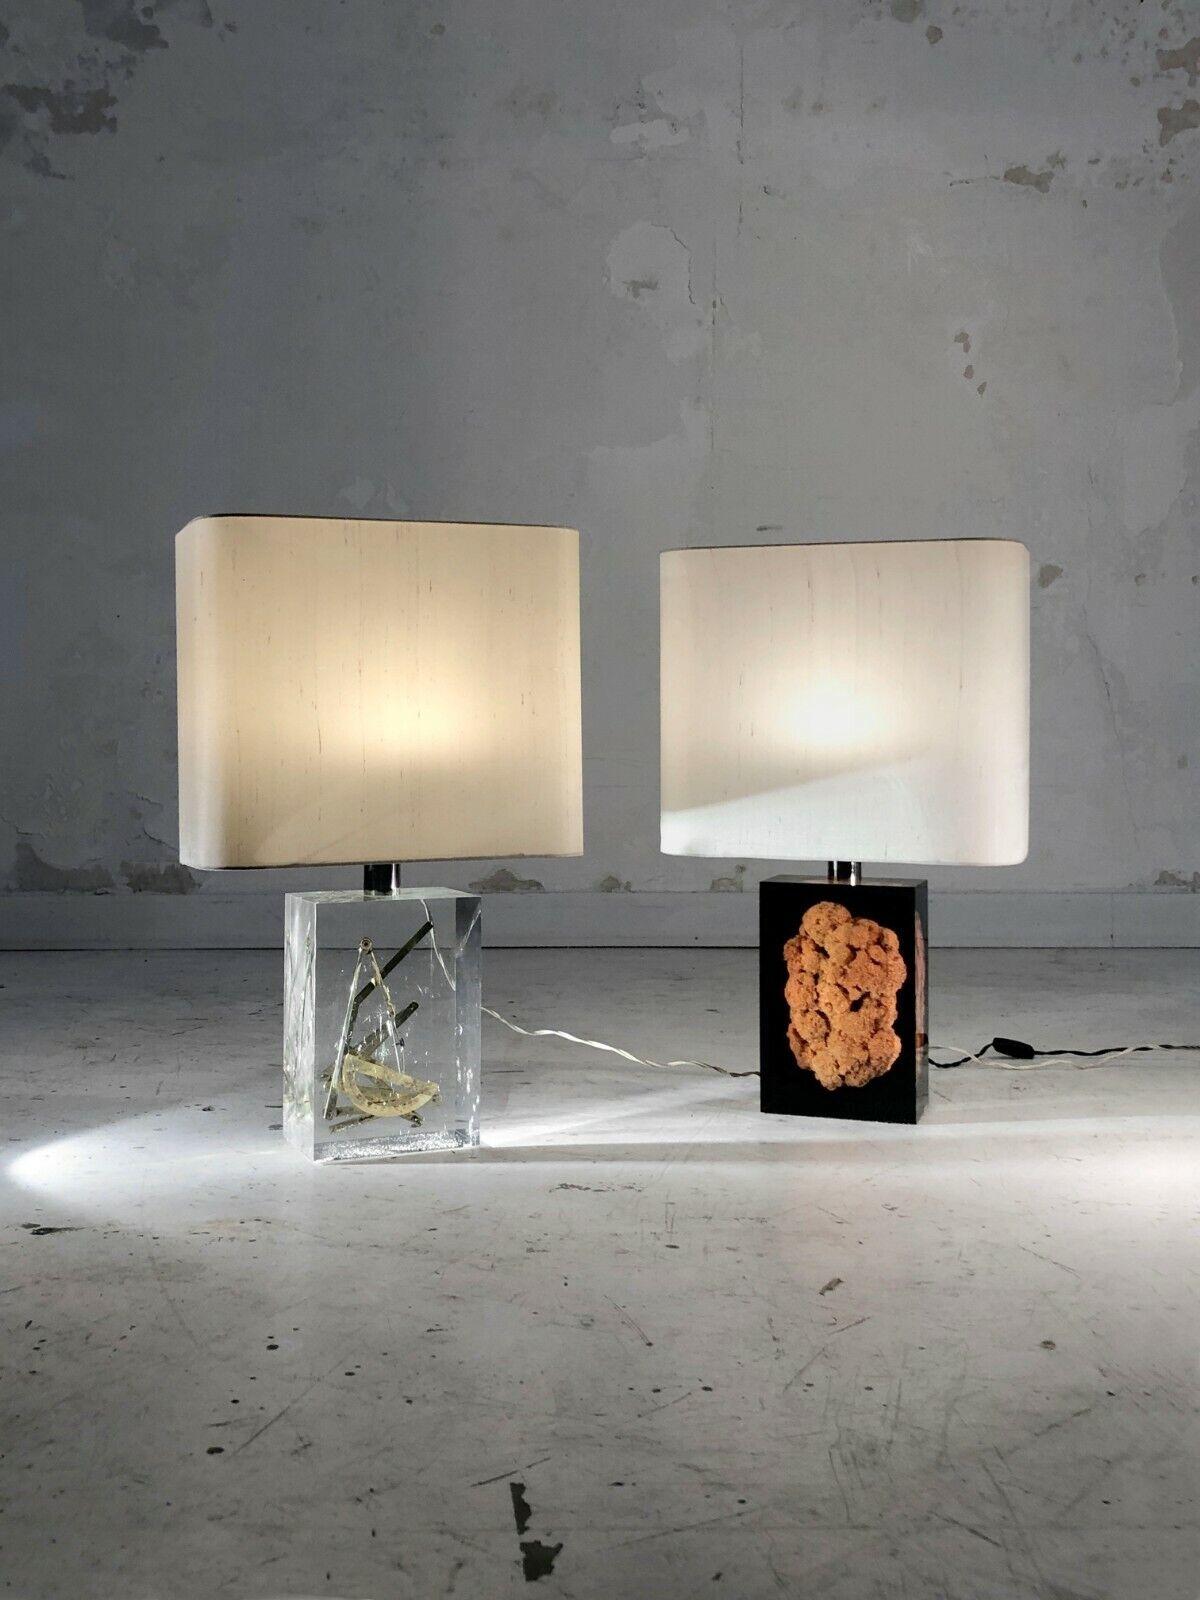 A spectacular and poetic pair of rectangular lucite table lamps : 2 massive inclusions of coral and golden objects topped with original lampshades, by Pierre Giraudon France 1970.

SOLD WITH THEIR ORIGINAL LAMPSHADE

DIMENSIONS:
Dimensions of each